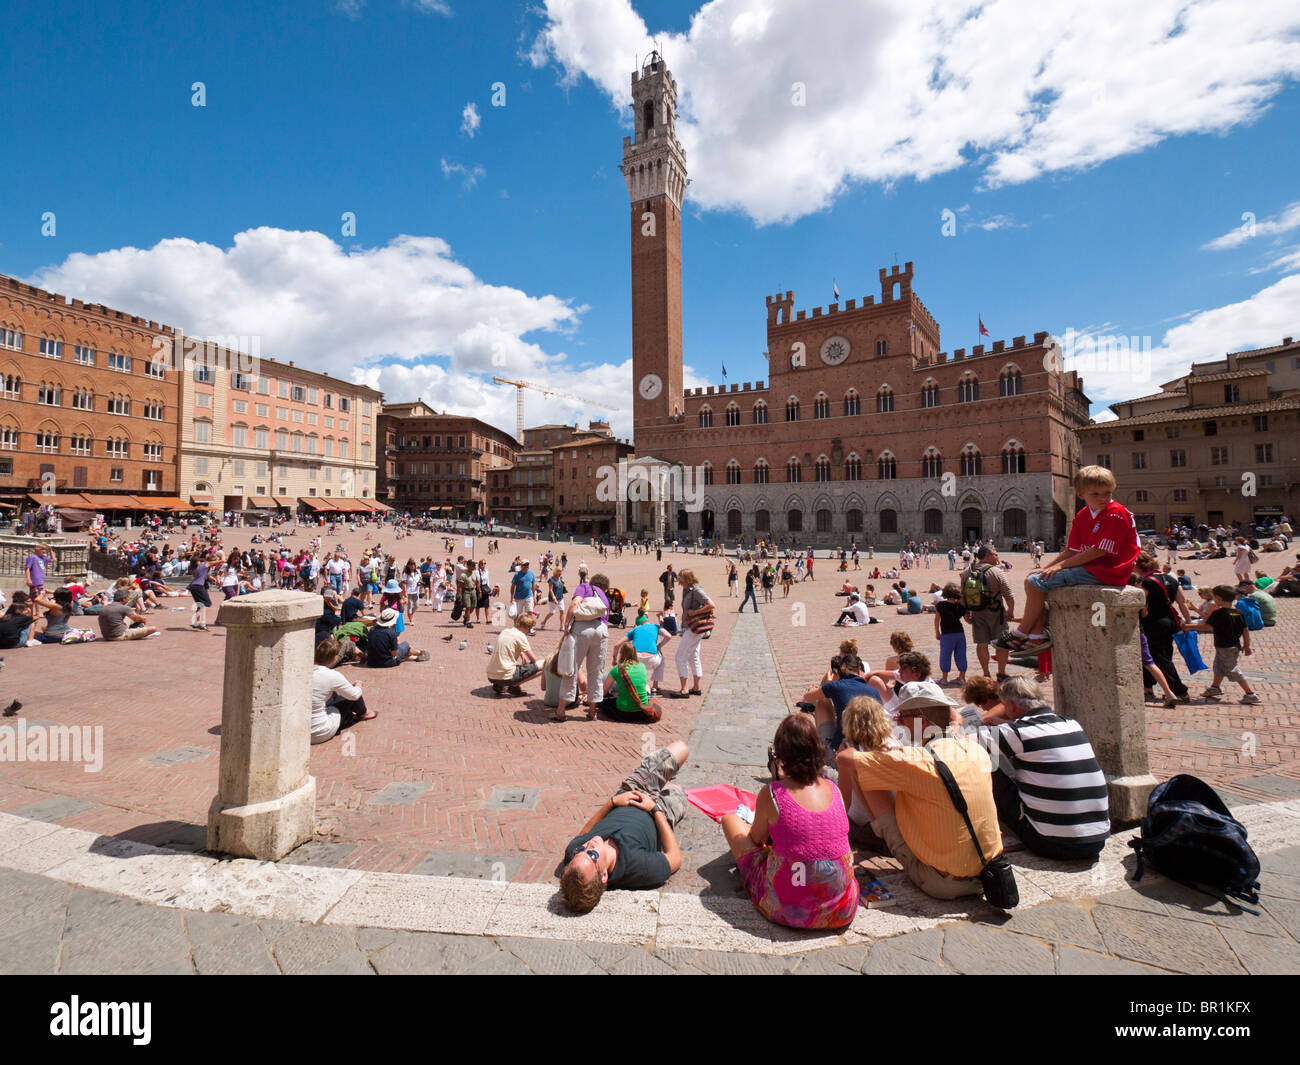 Tourists visit 'Il Campo', the central square at the old town of Siena in Tuscany, Italy. Stock Photo